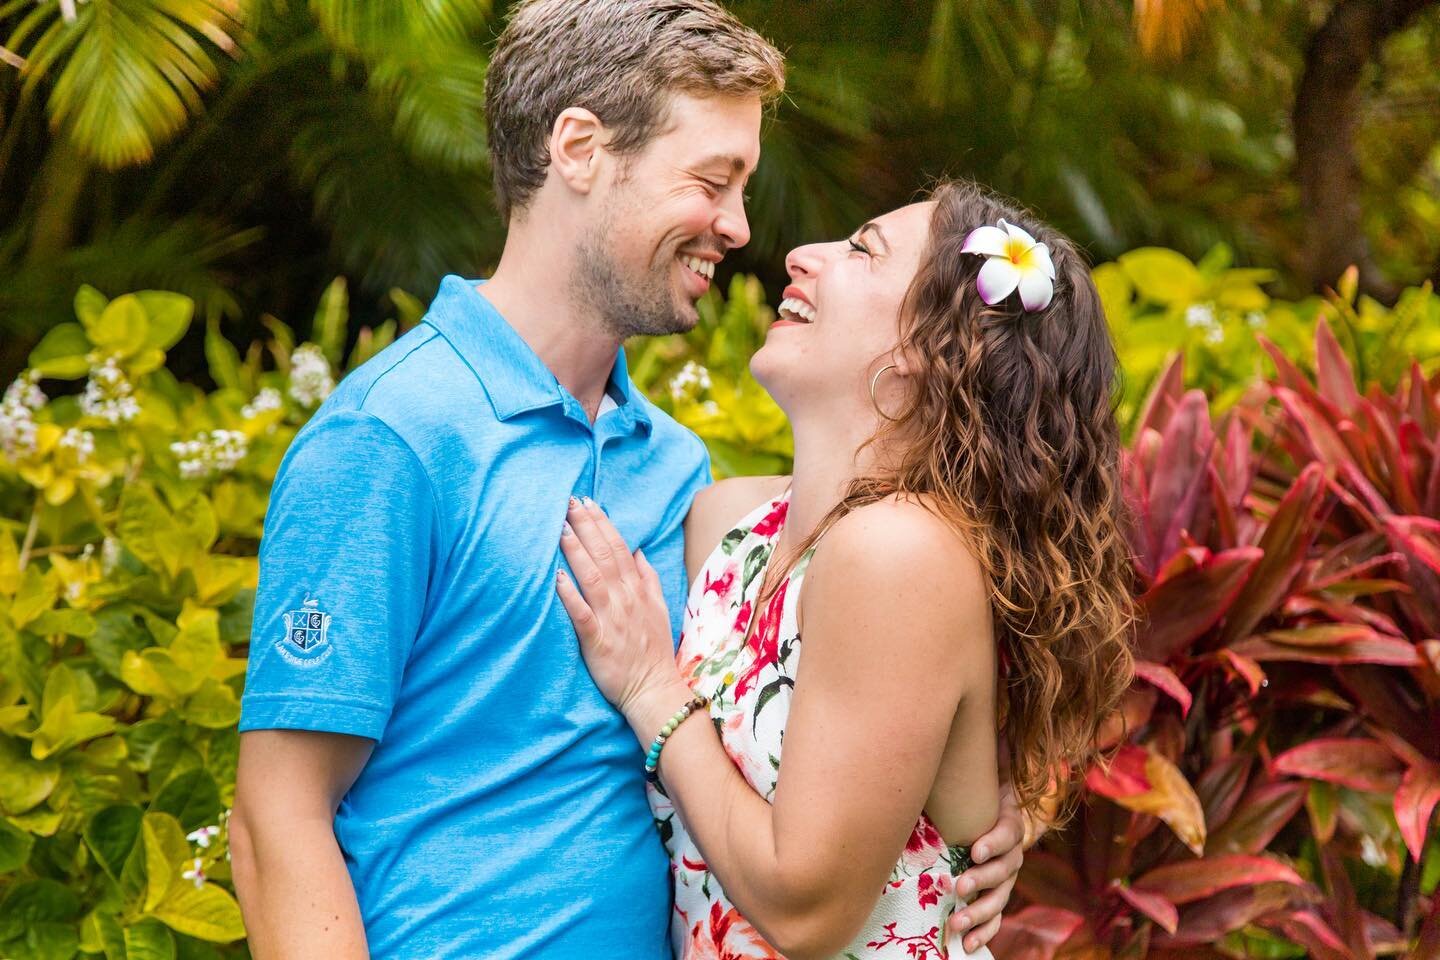 Yes, of course we did a photoshoot on our last night in Hawaii and yes, we hammed it up like spam. 🌺
#tbt #Hawaii #Maui #love #spam #mahalo #couples #siblings #happy #family #SallGood